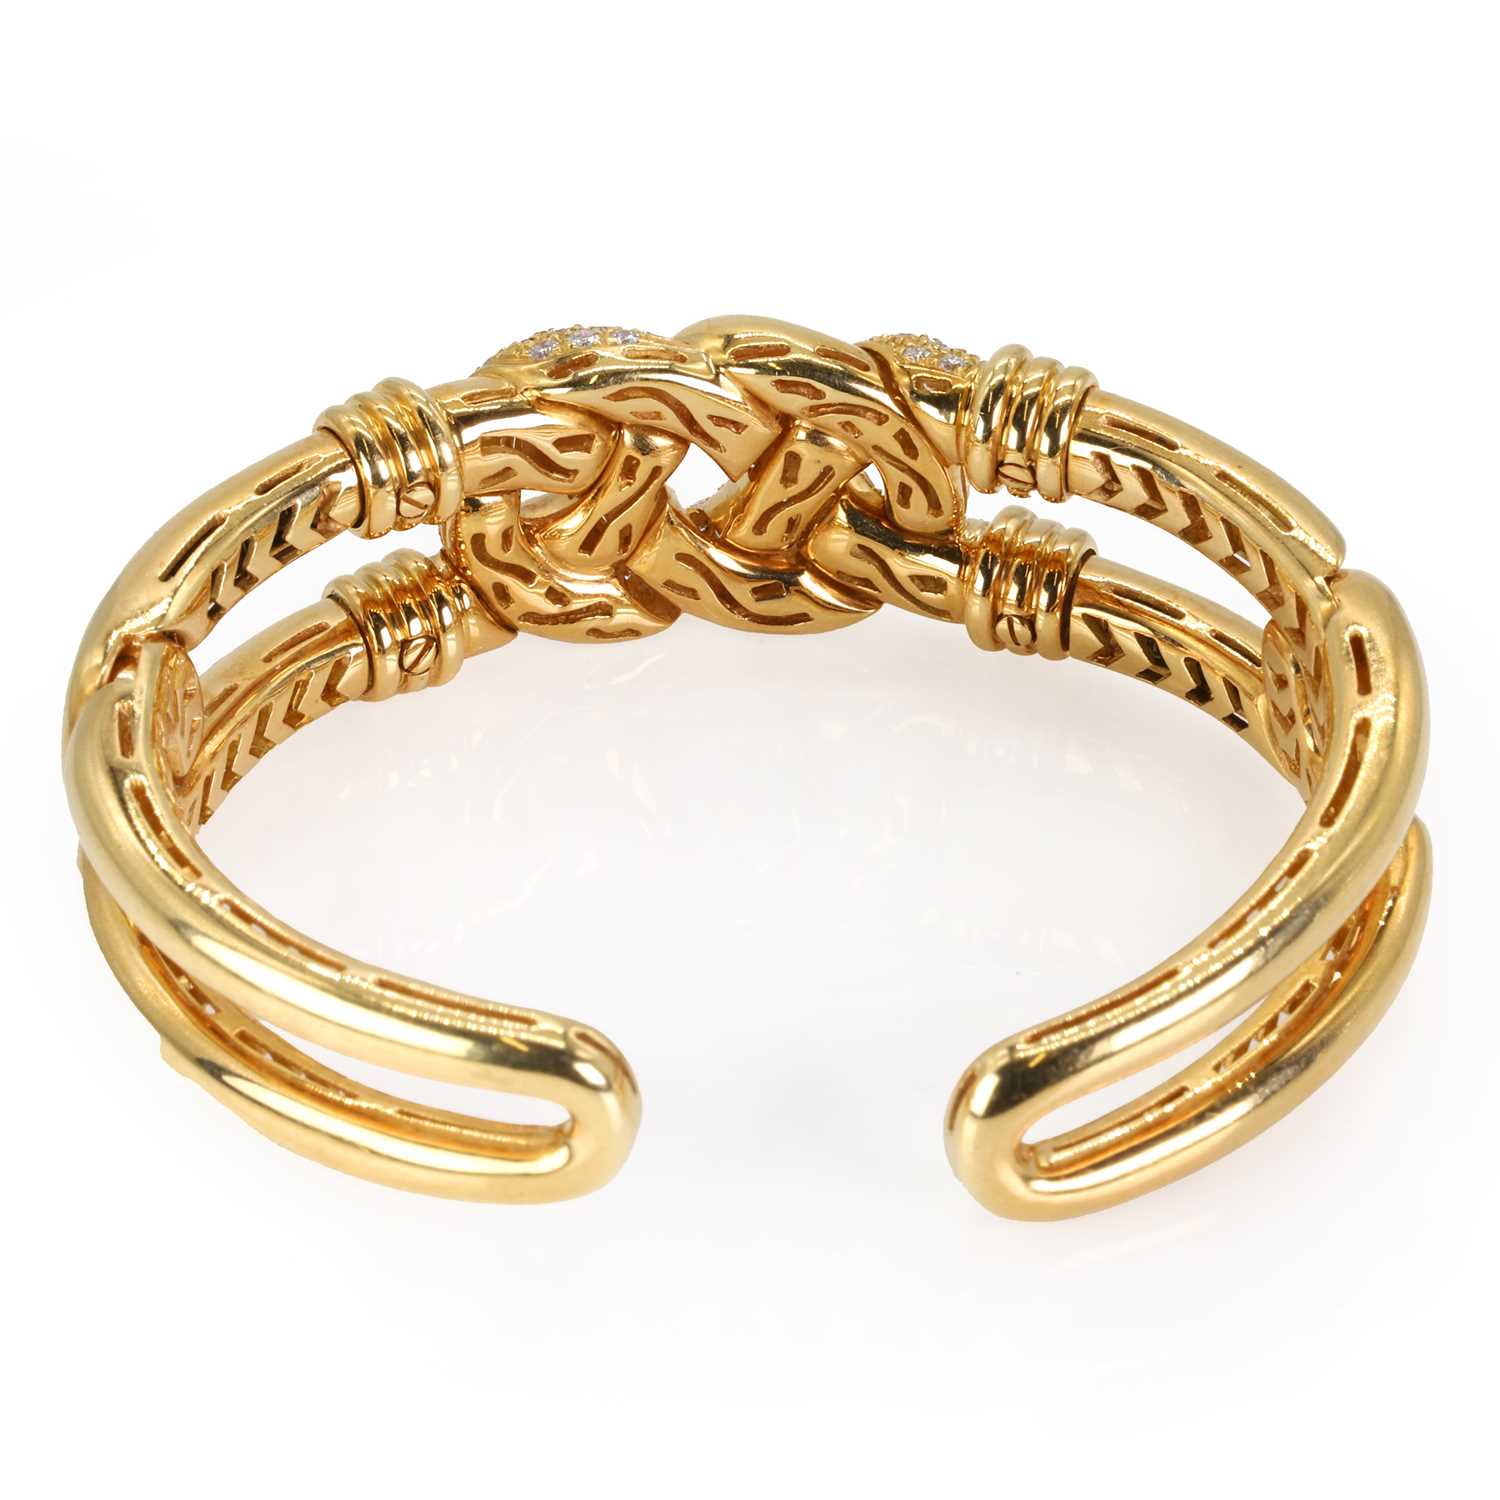 An 18ct gold and diamond bangle, by Asprey, - Image 2 of 4